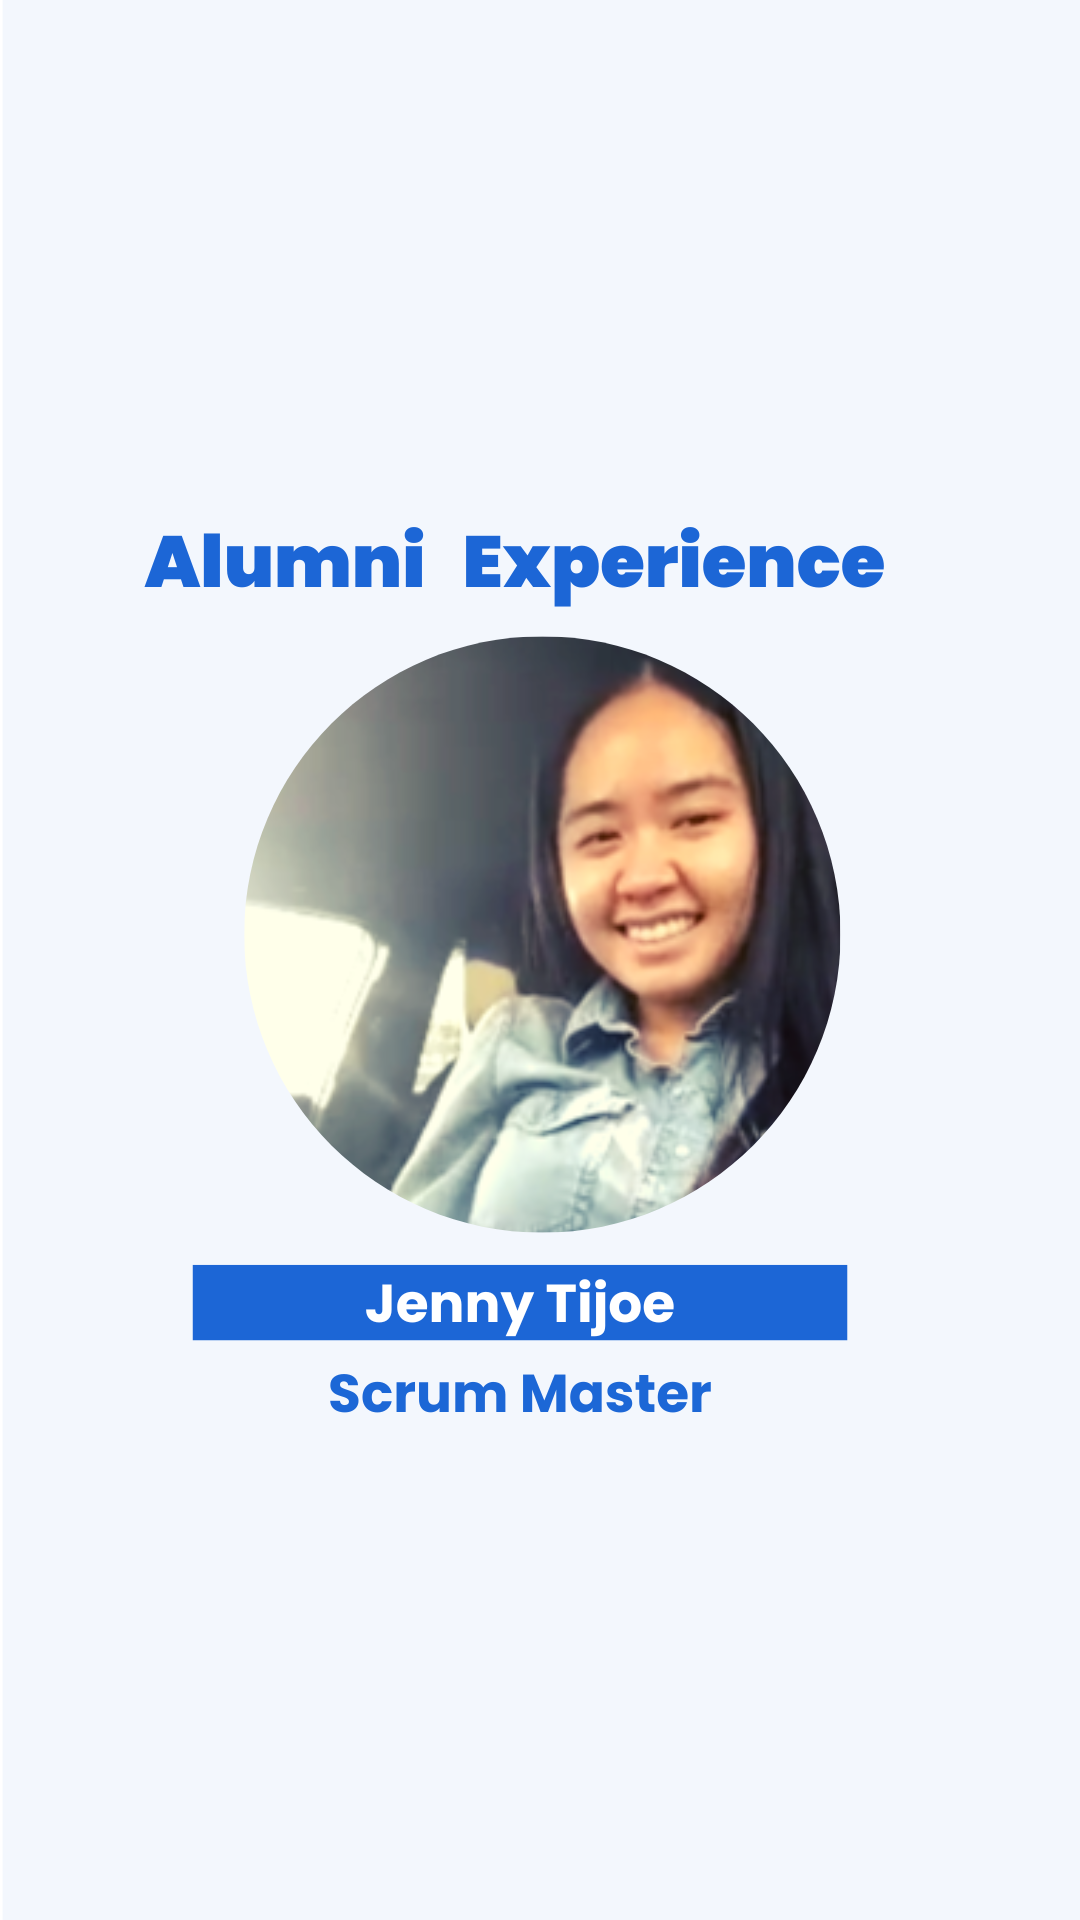 A picture of jenny tijoe with the words alumni experience